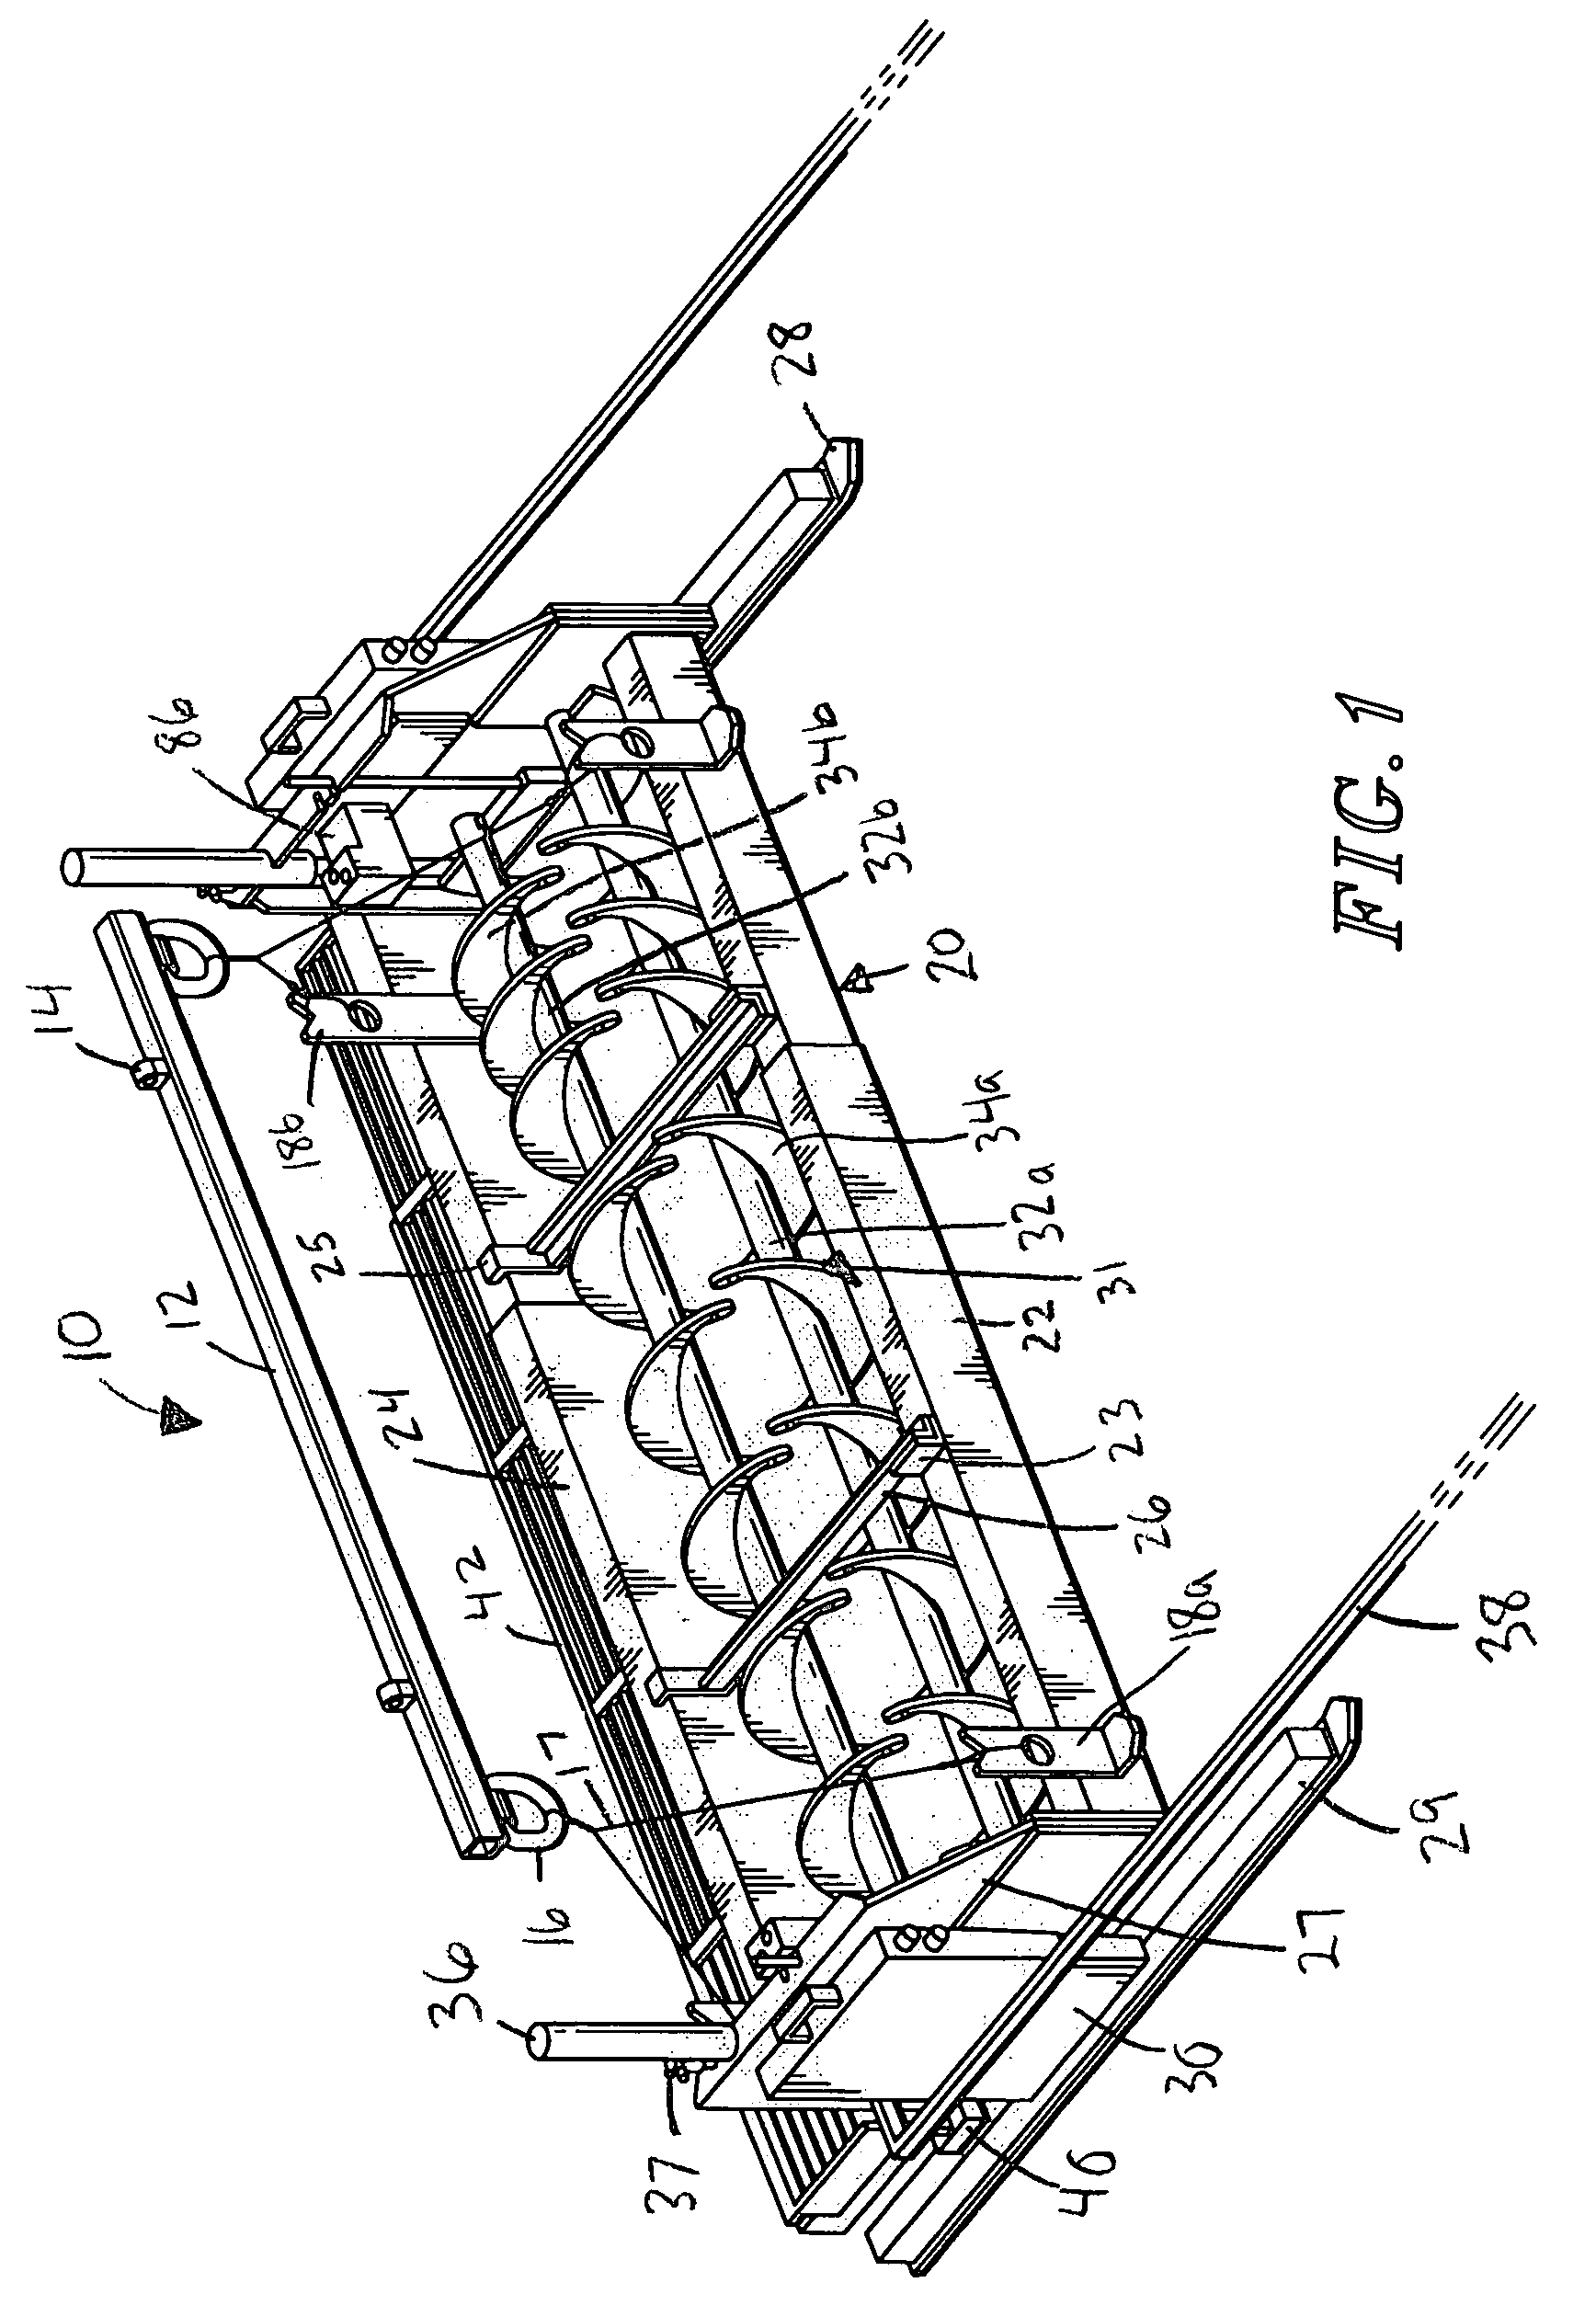 Portable drag box with automated shearing device